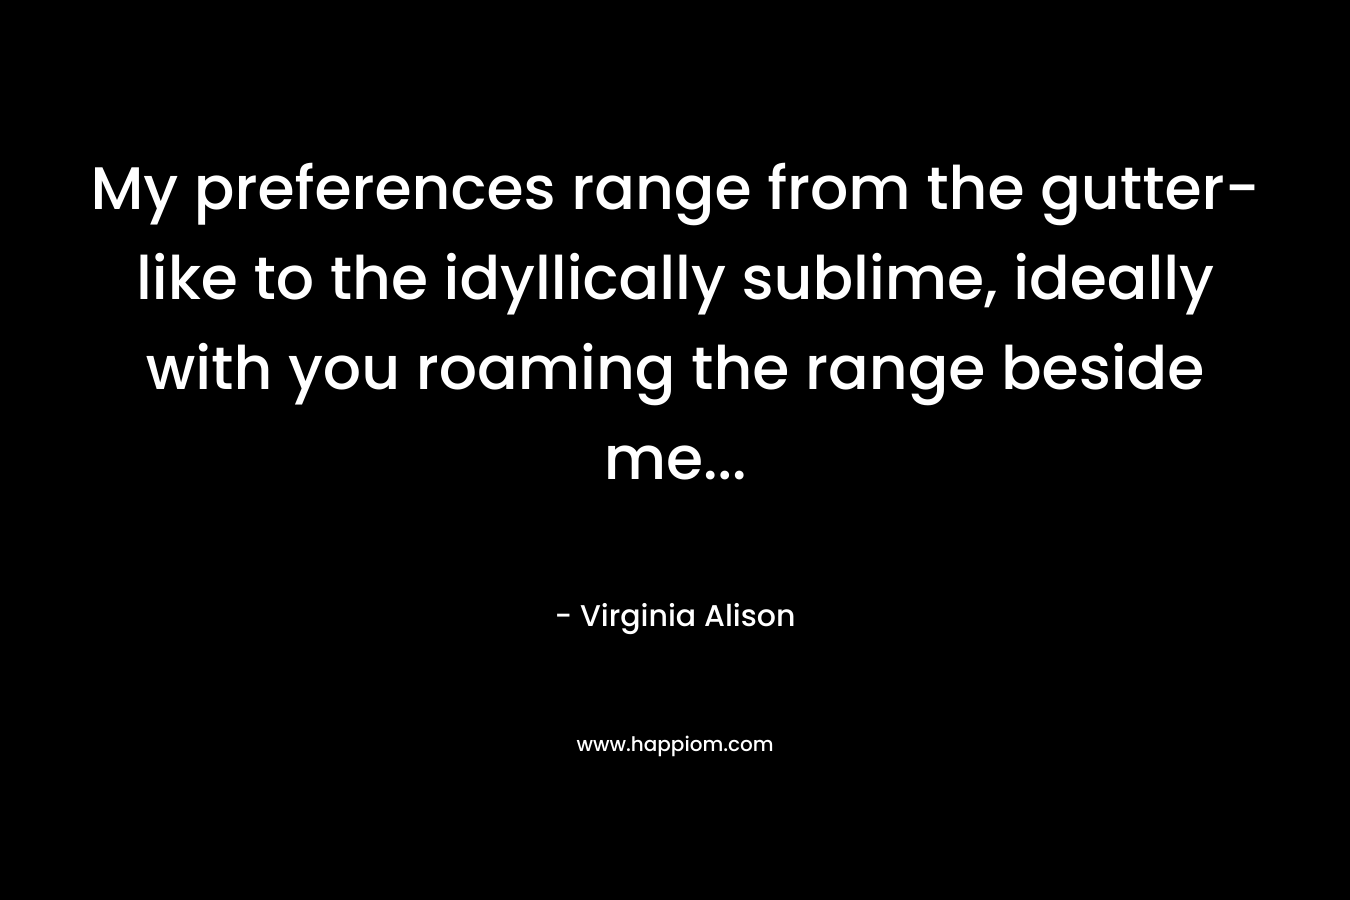 My preferences range from the gutter-like to the idyllically sublime, ideally with you roaming the range beside me...